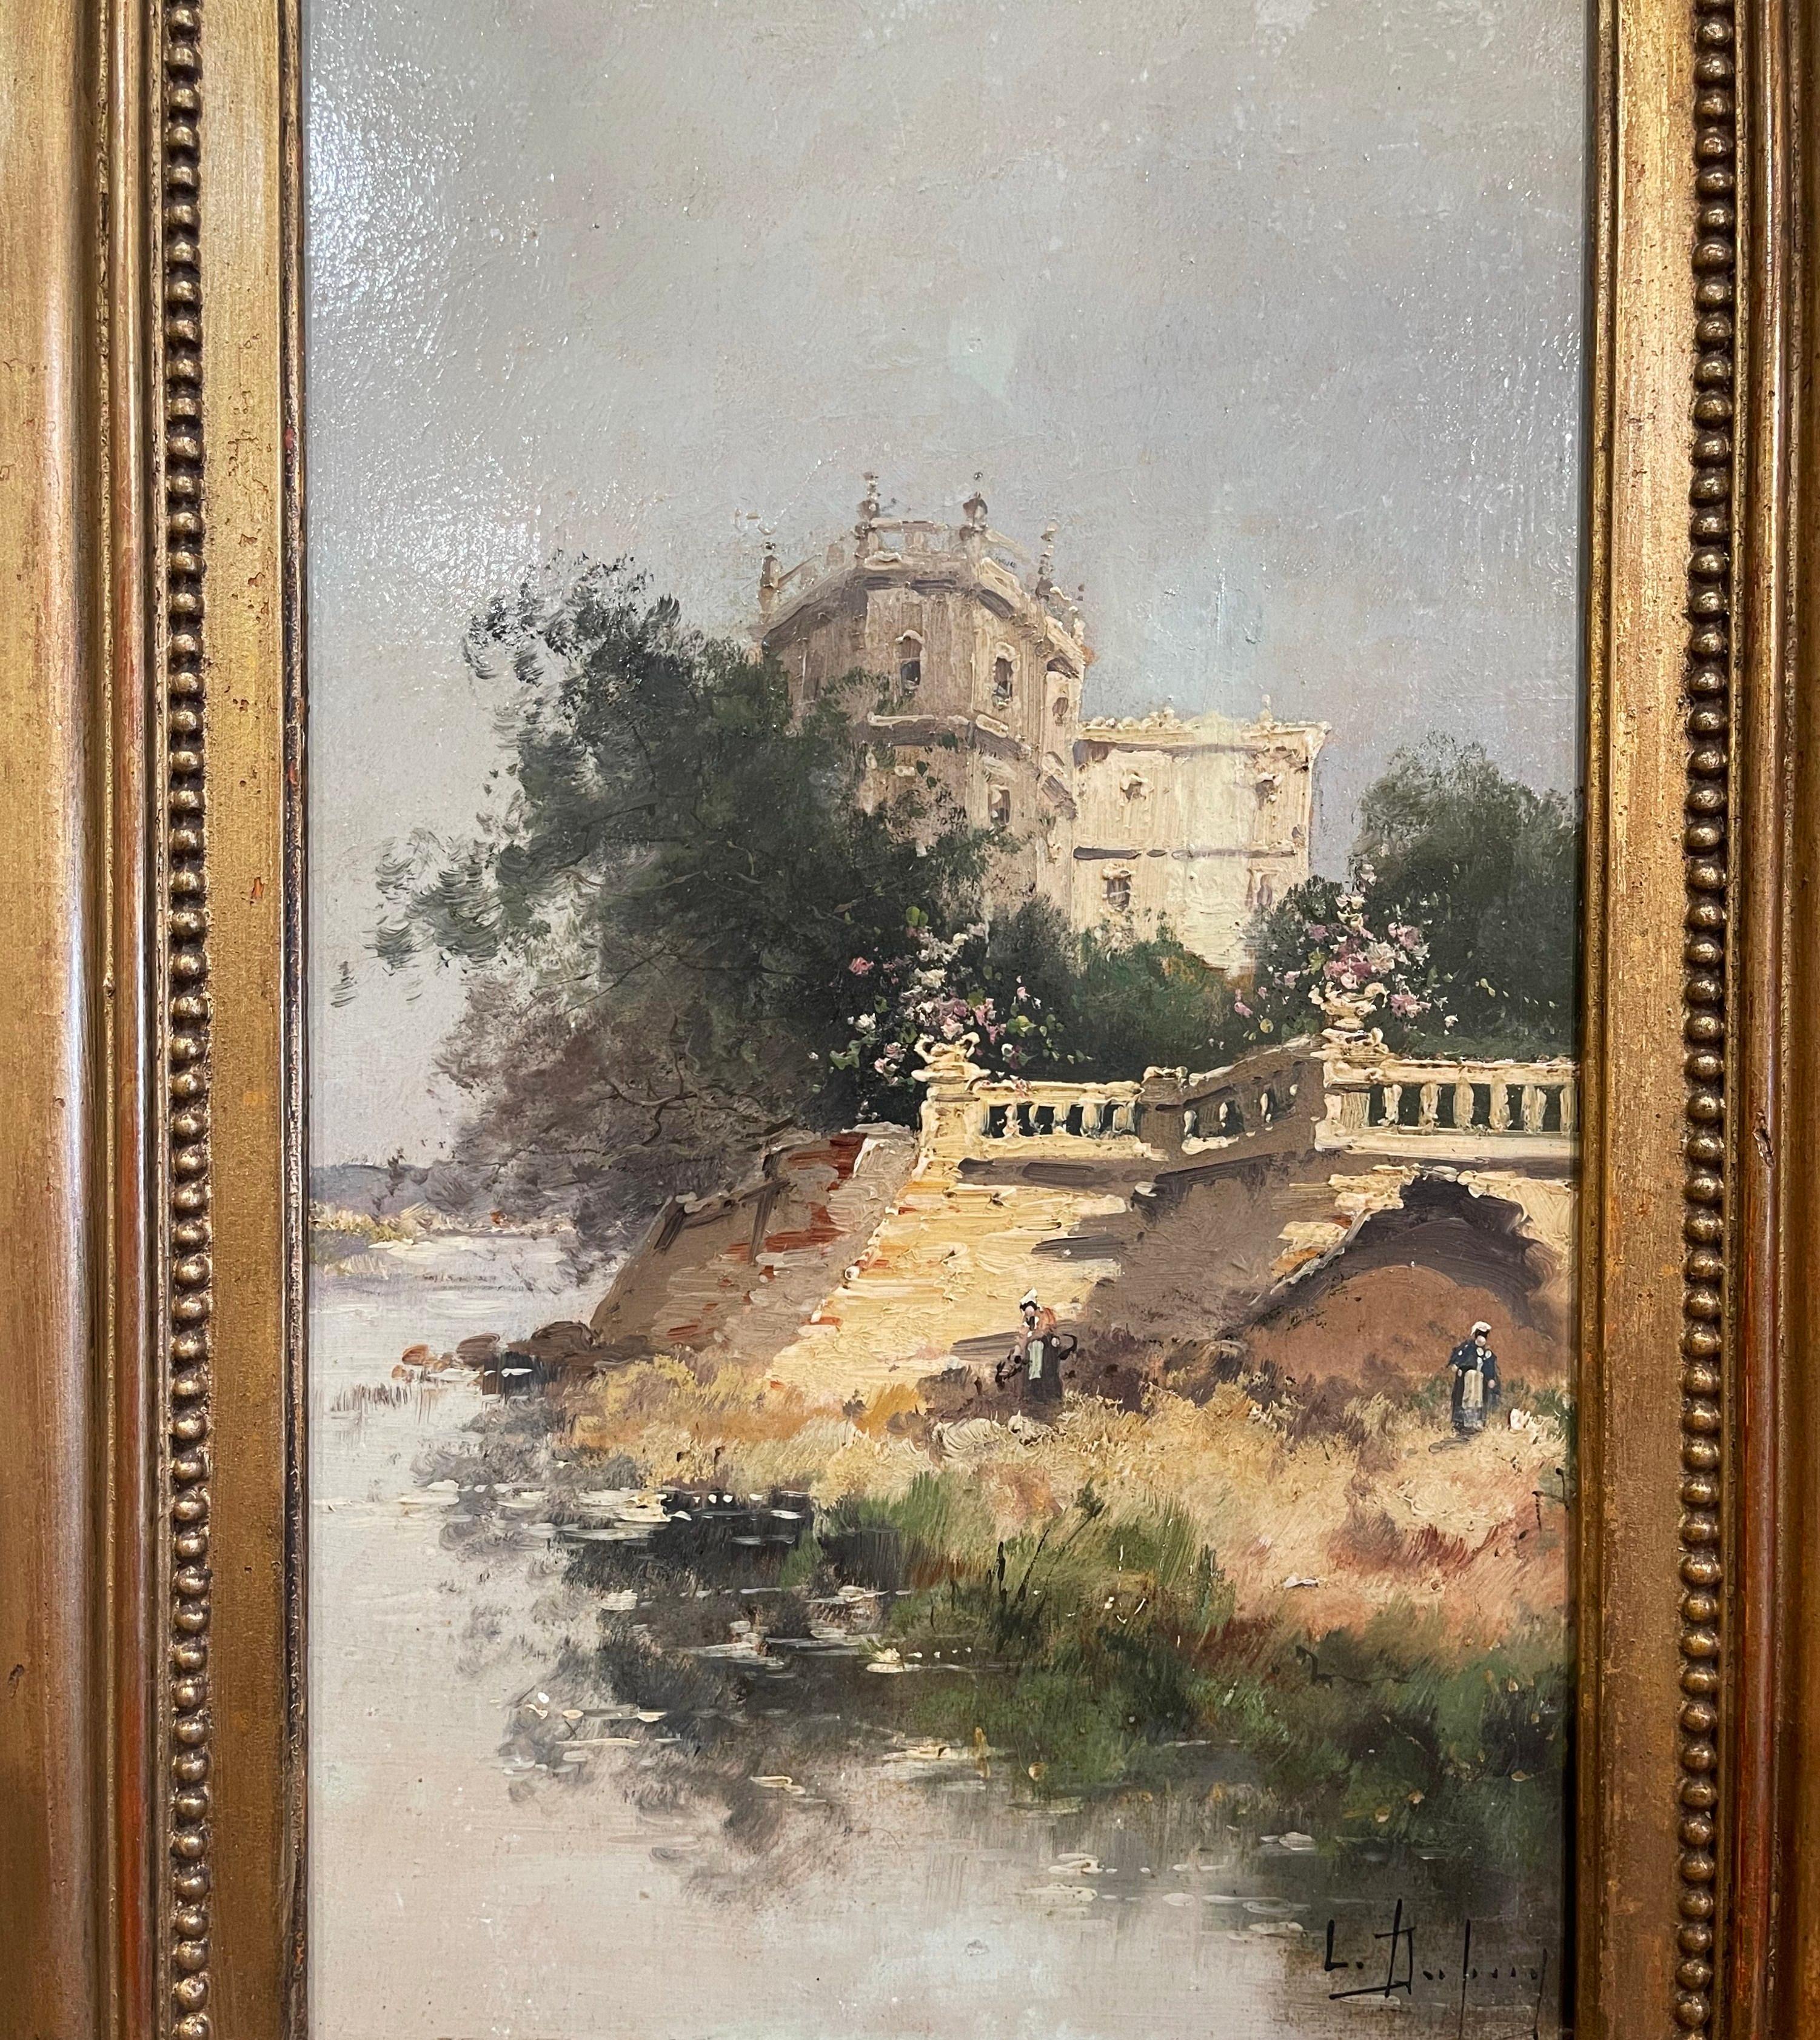 French 19th Century, Framed Landscape Painting Signed L. Dupuy for E. Galien-Laloue